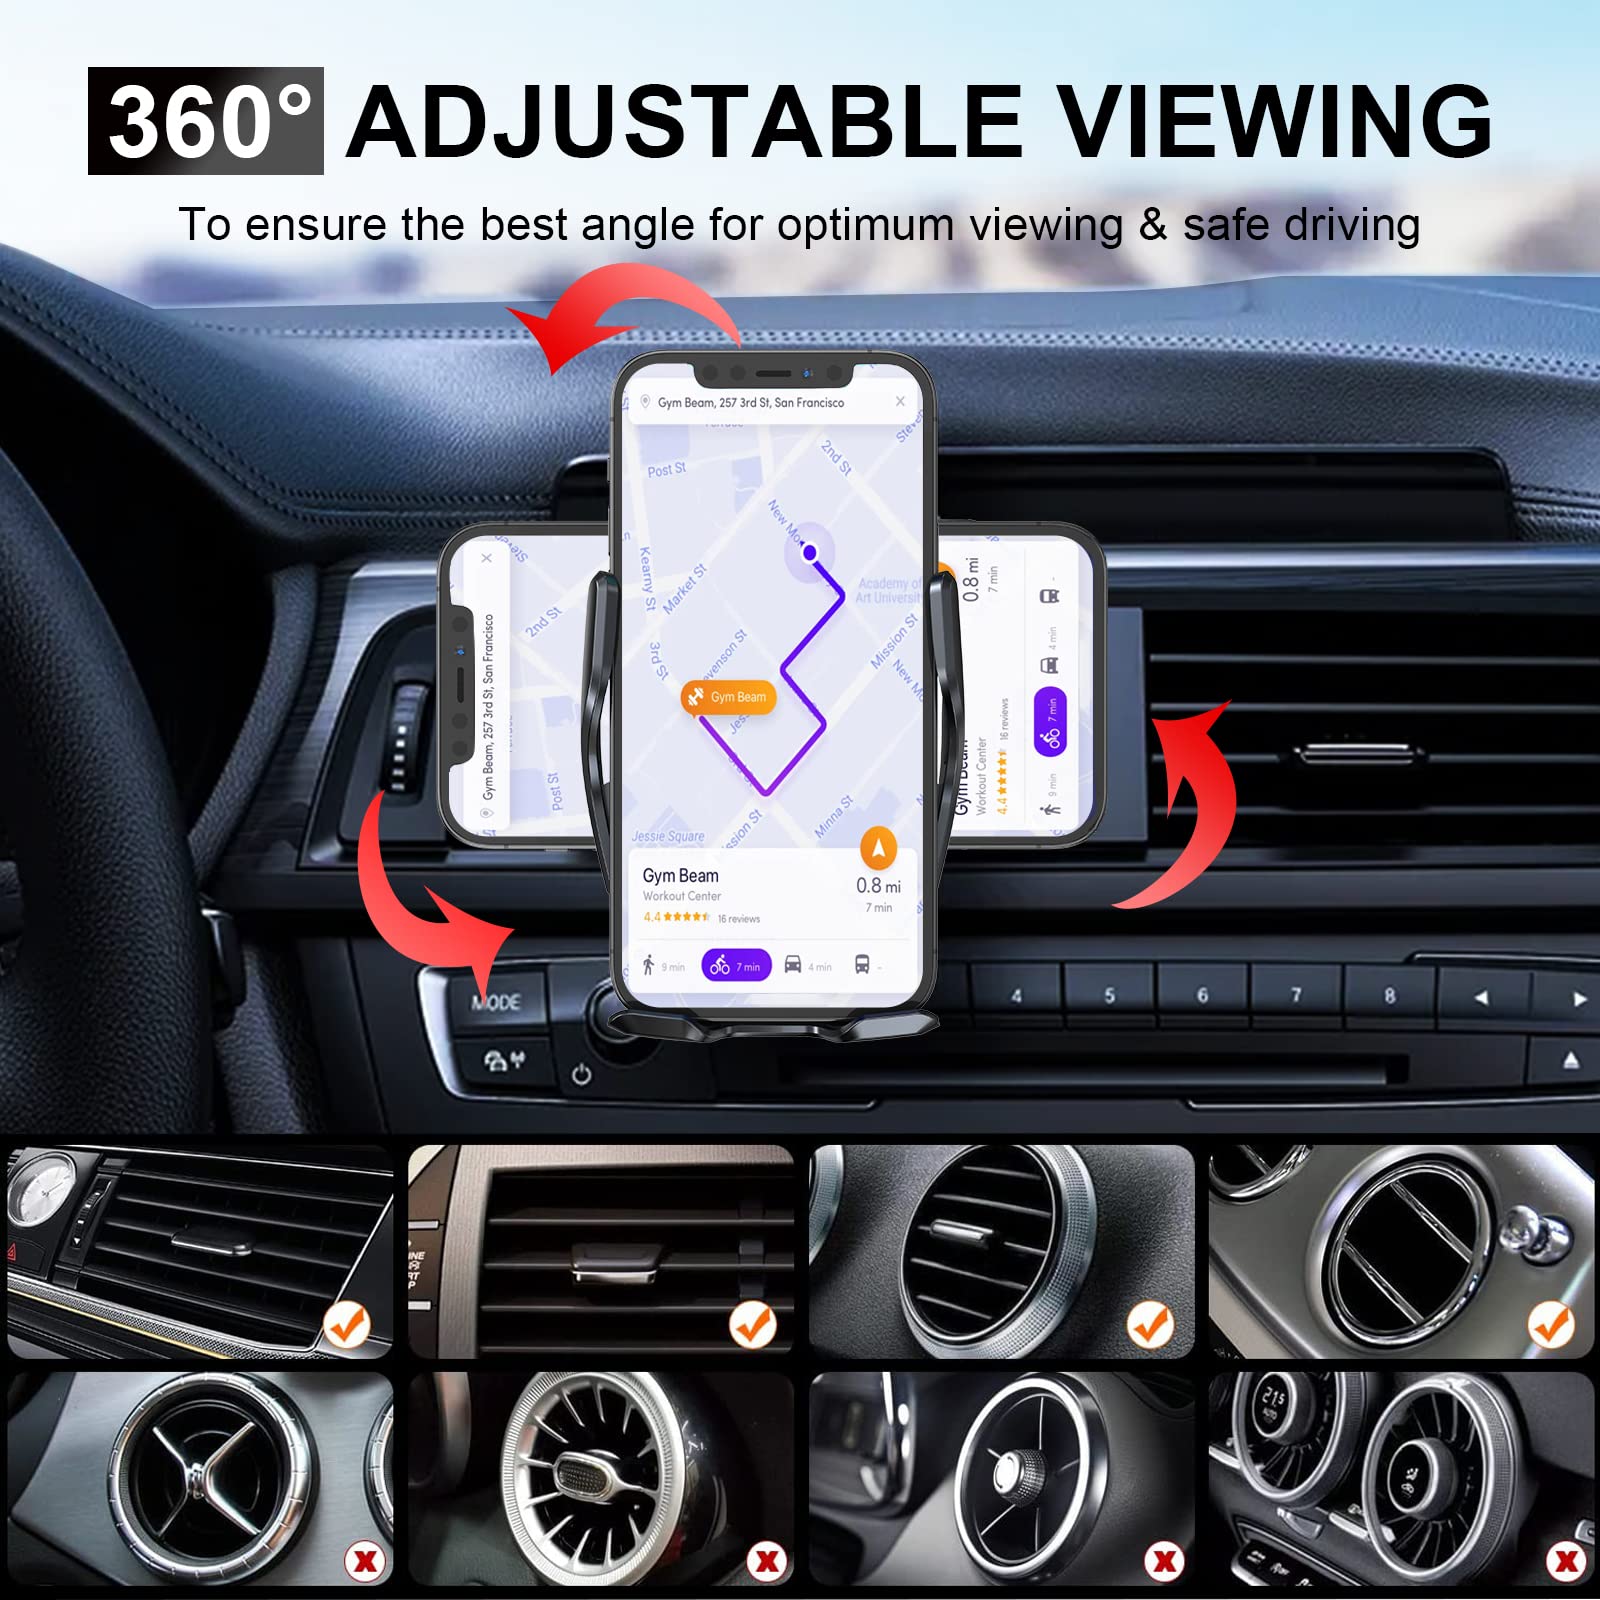 Wireless Car Charger Mount,15W Qi Fast Charging Auto-Clamping Car Phone Holder, Air Vent Windshield Dashboard Car Phone Mount for iPhone 13/12/11 Pro Max,Samsung S20/S10/Note10